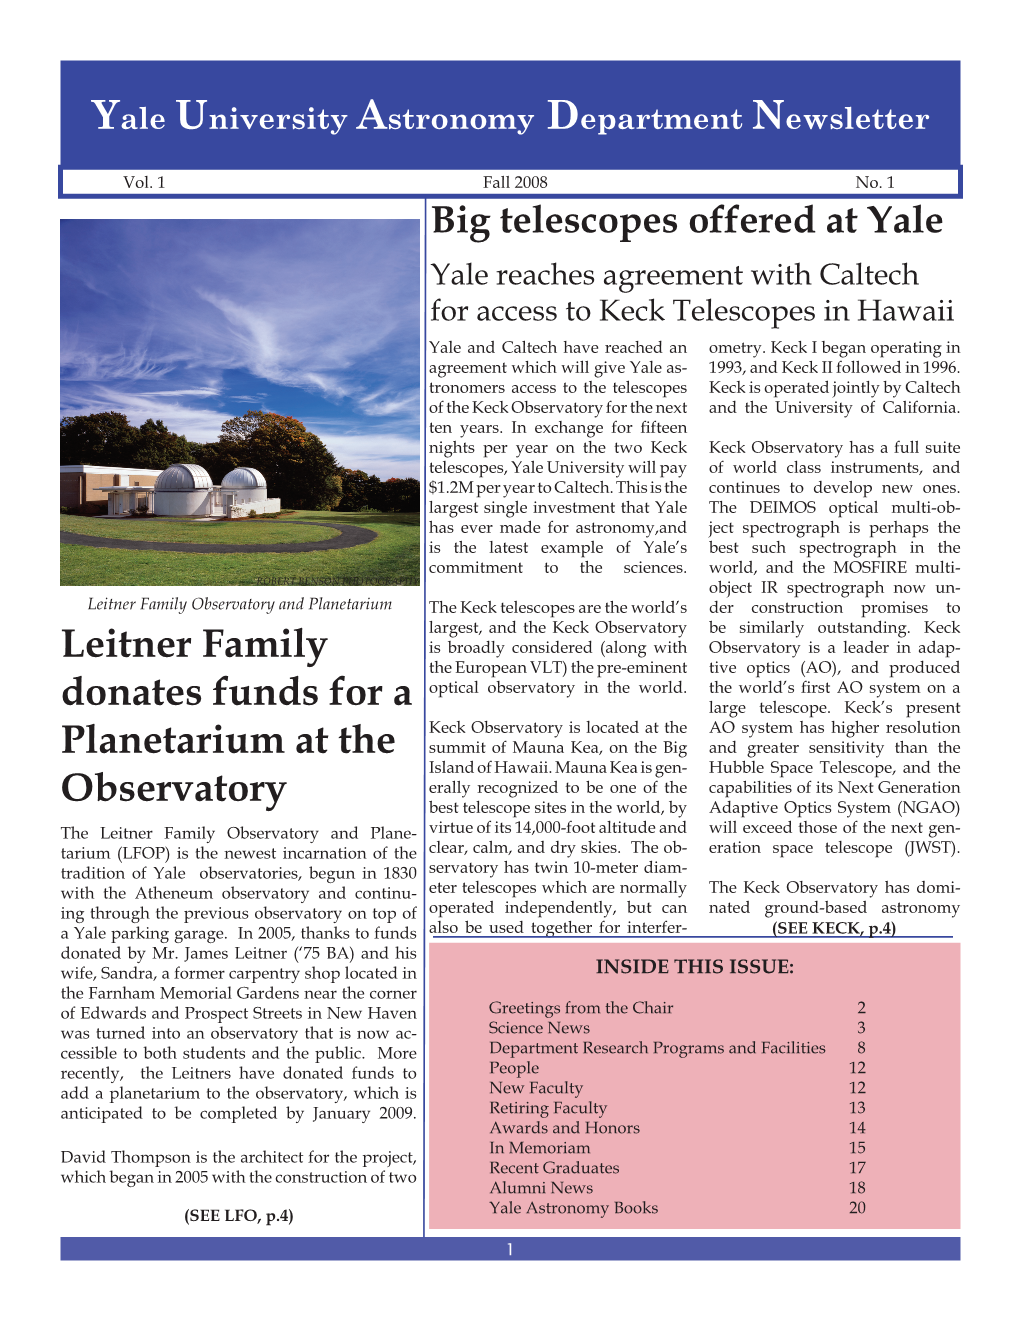 Leitner Family Donates Funds for a Planetarium at the Observatory